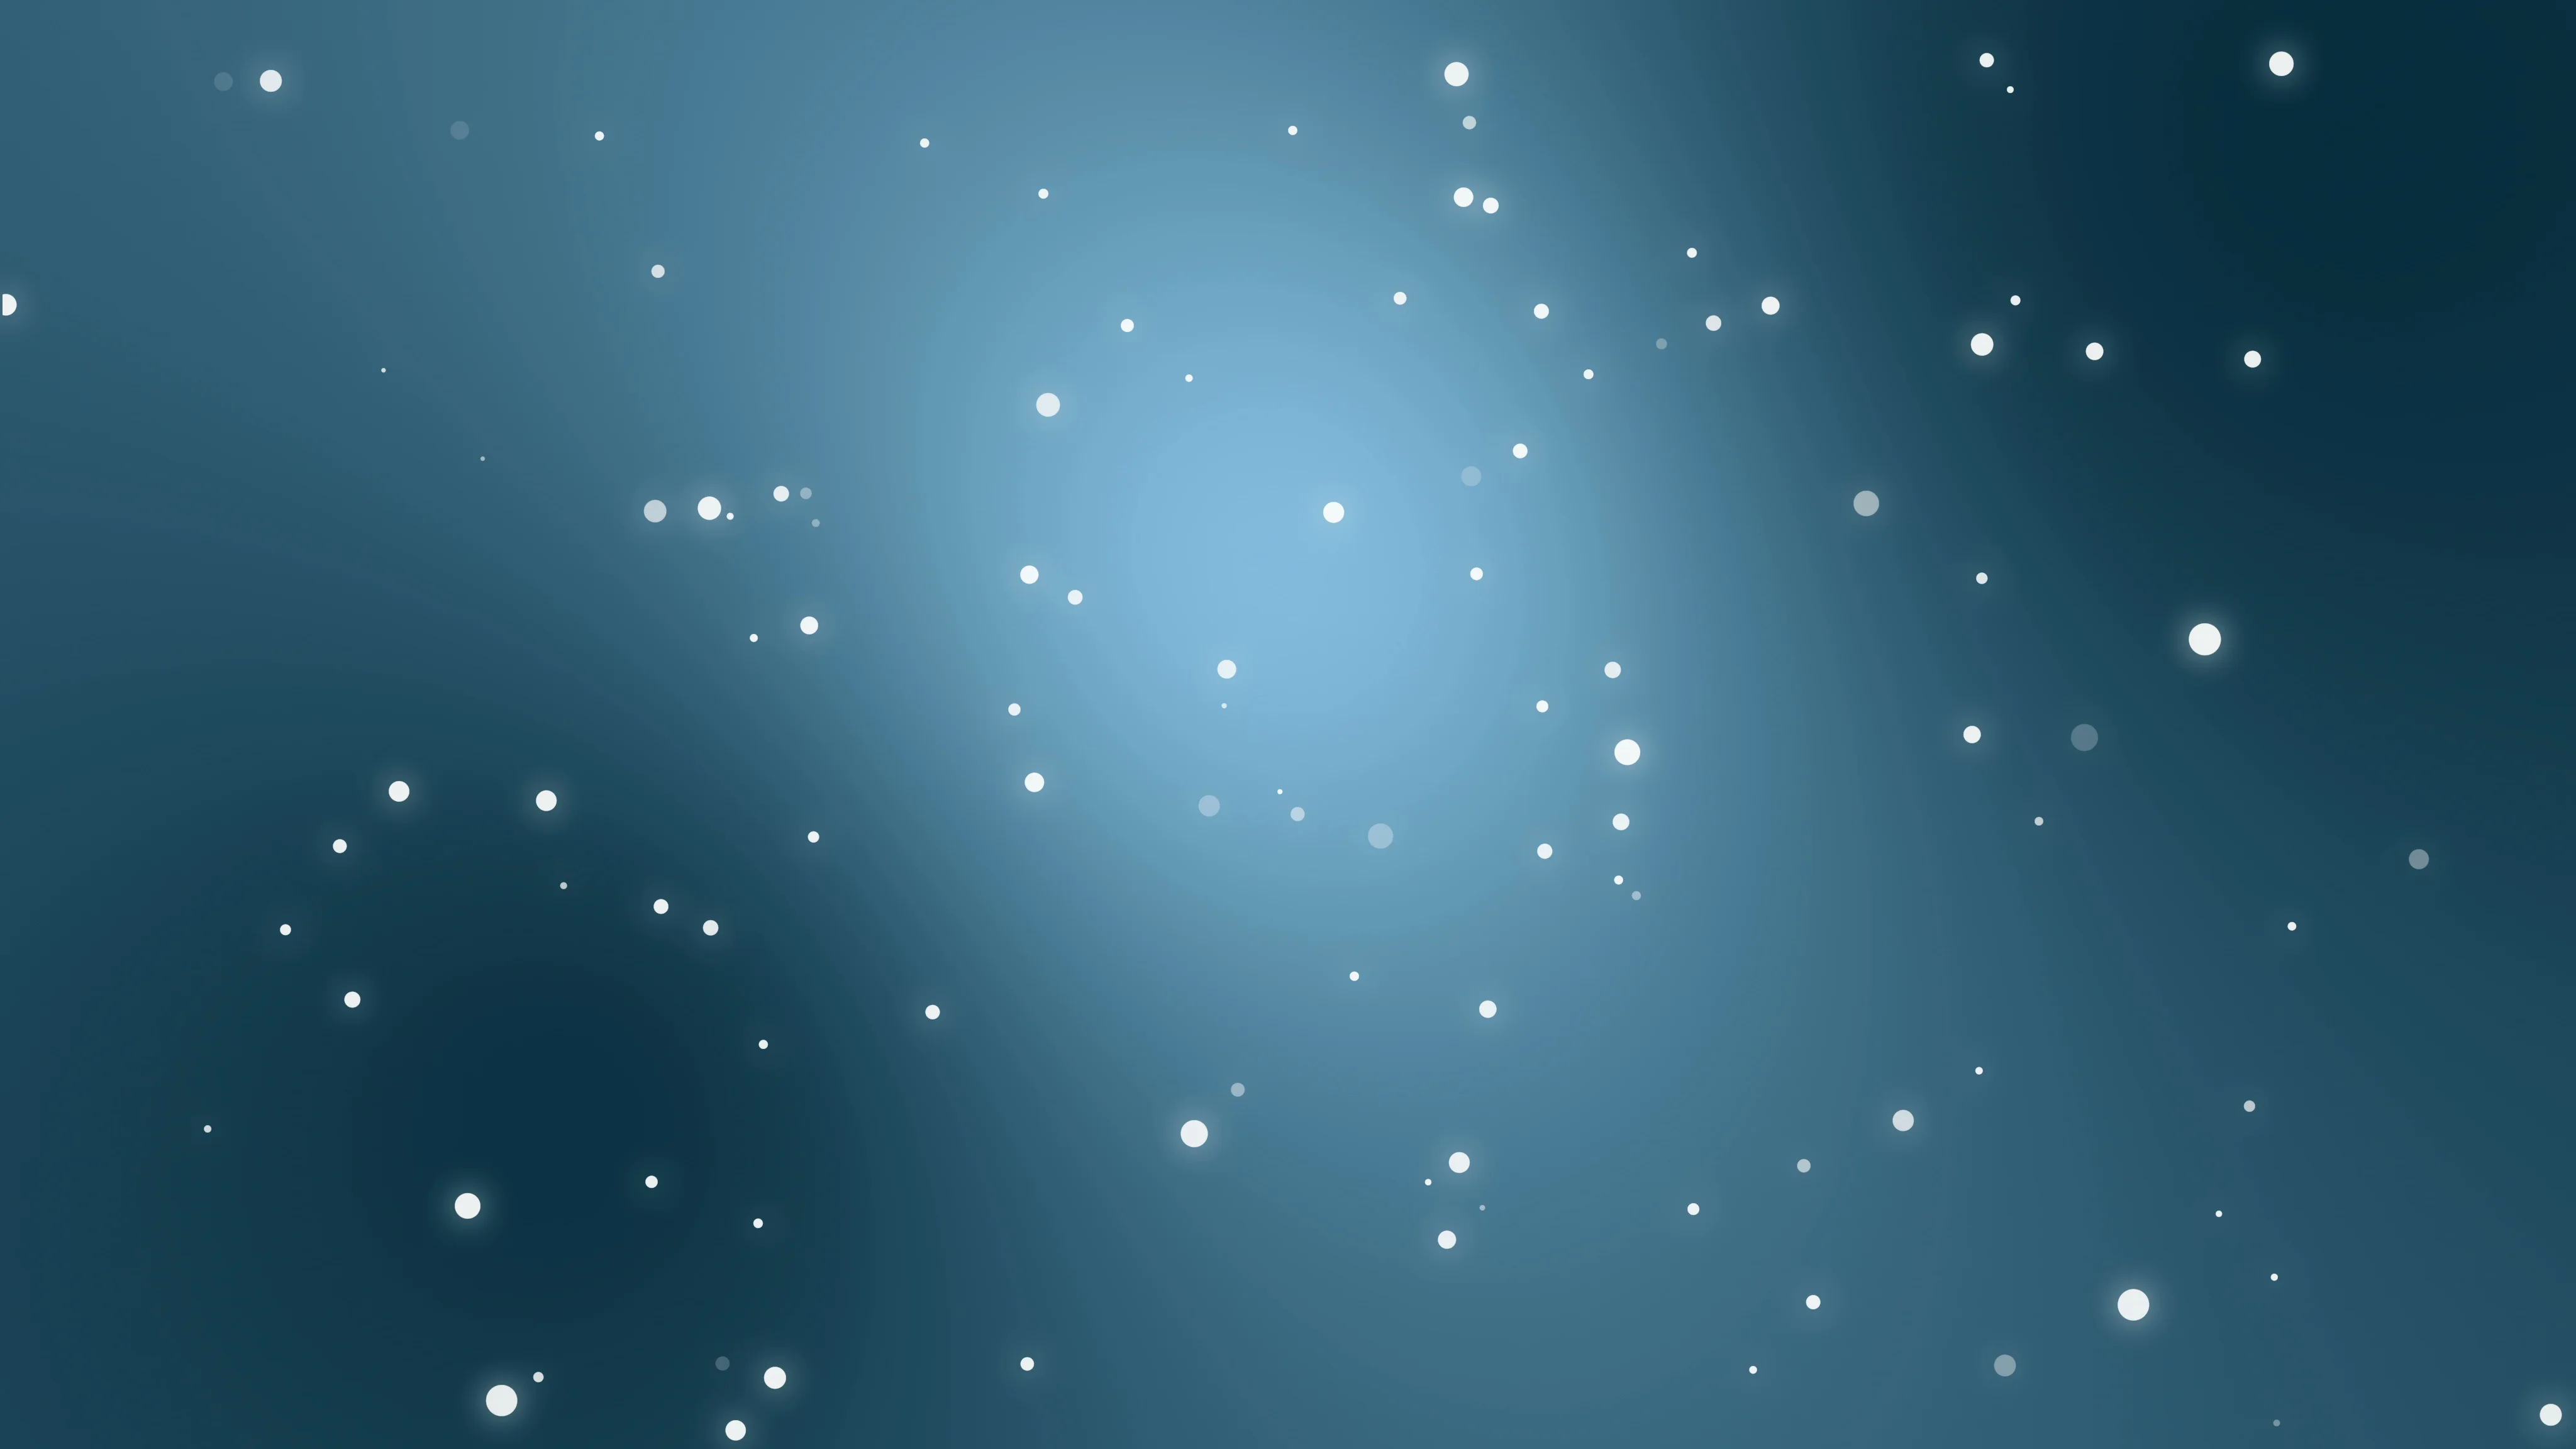 Animated night sky background with stars | Stock Video | Pond5